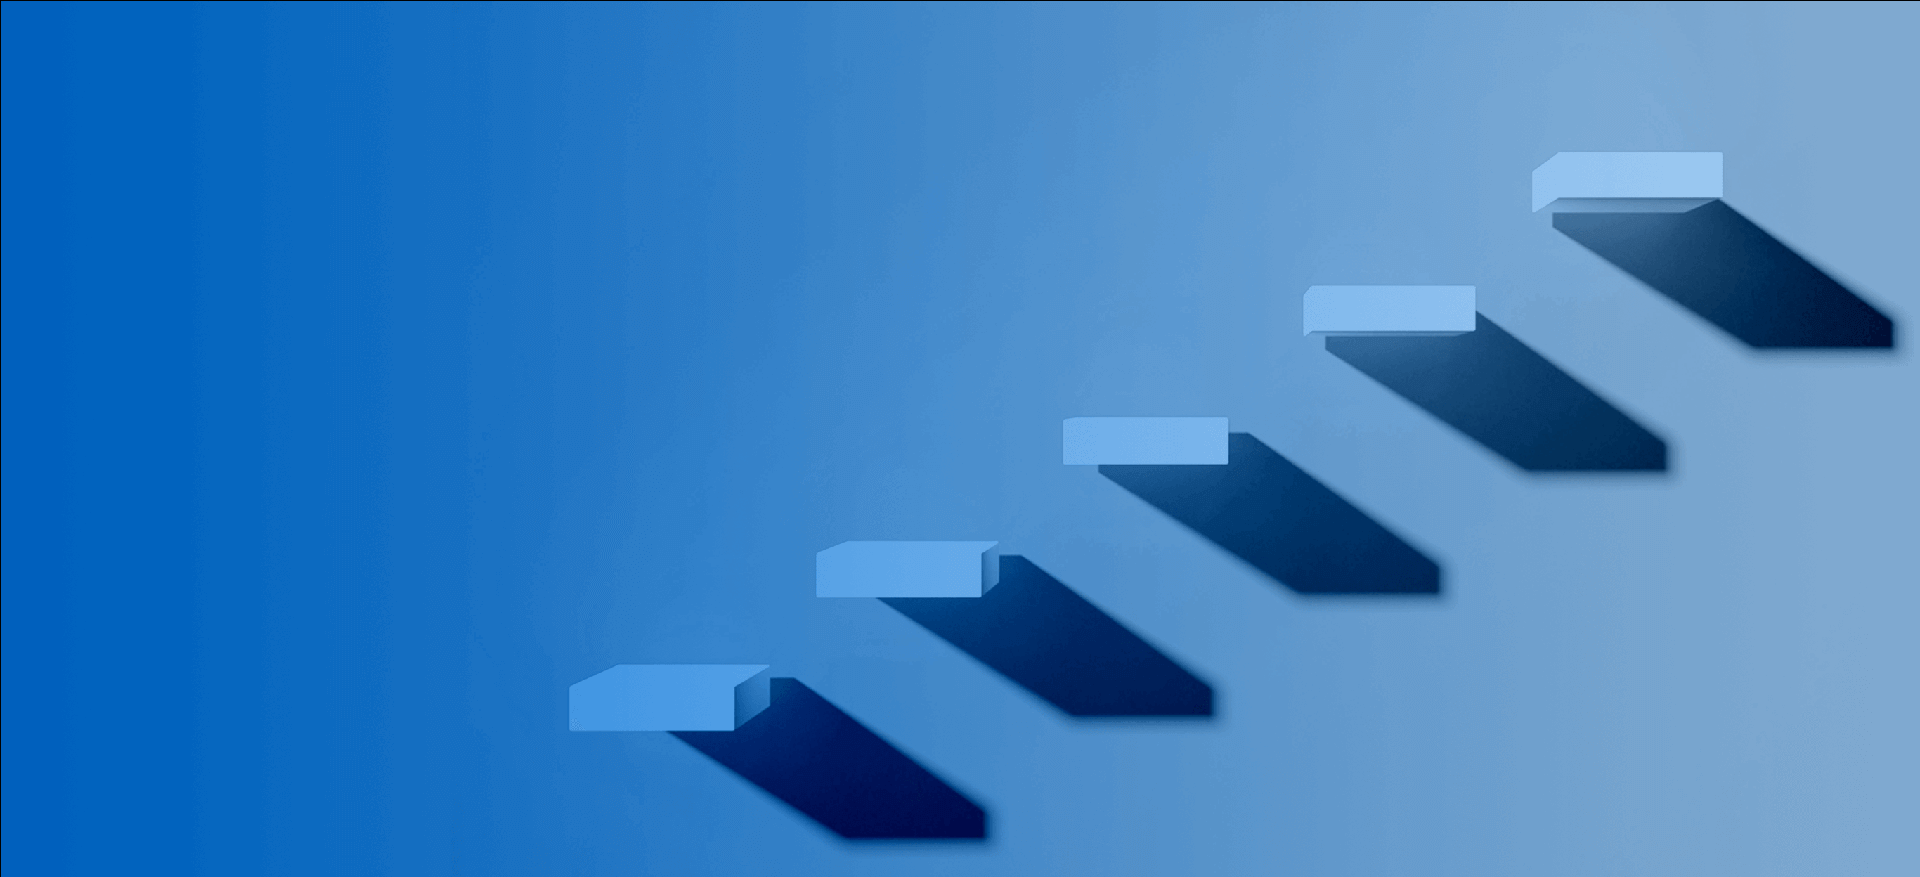 Associative image stairs growing up meaning business growth with Grownu system